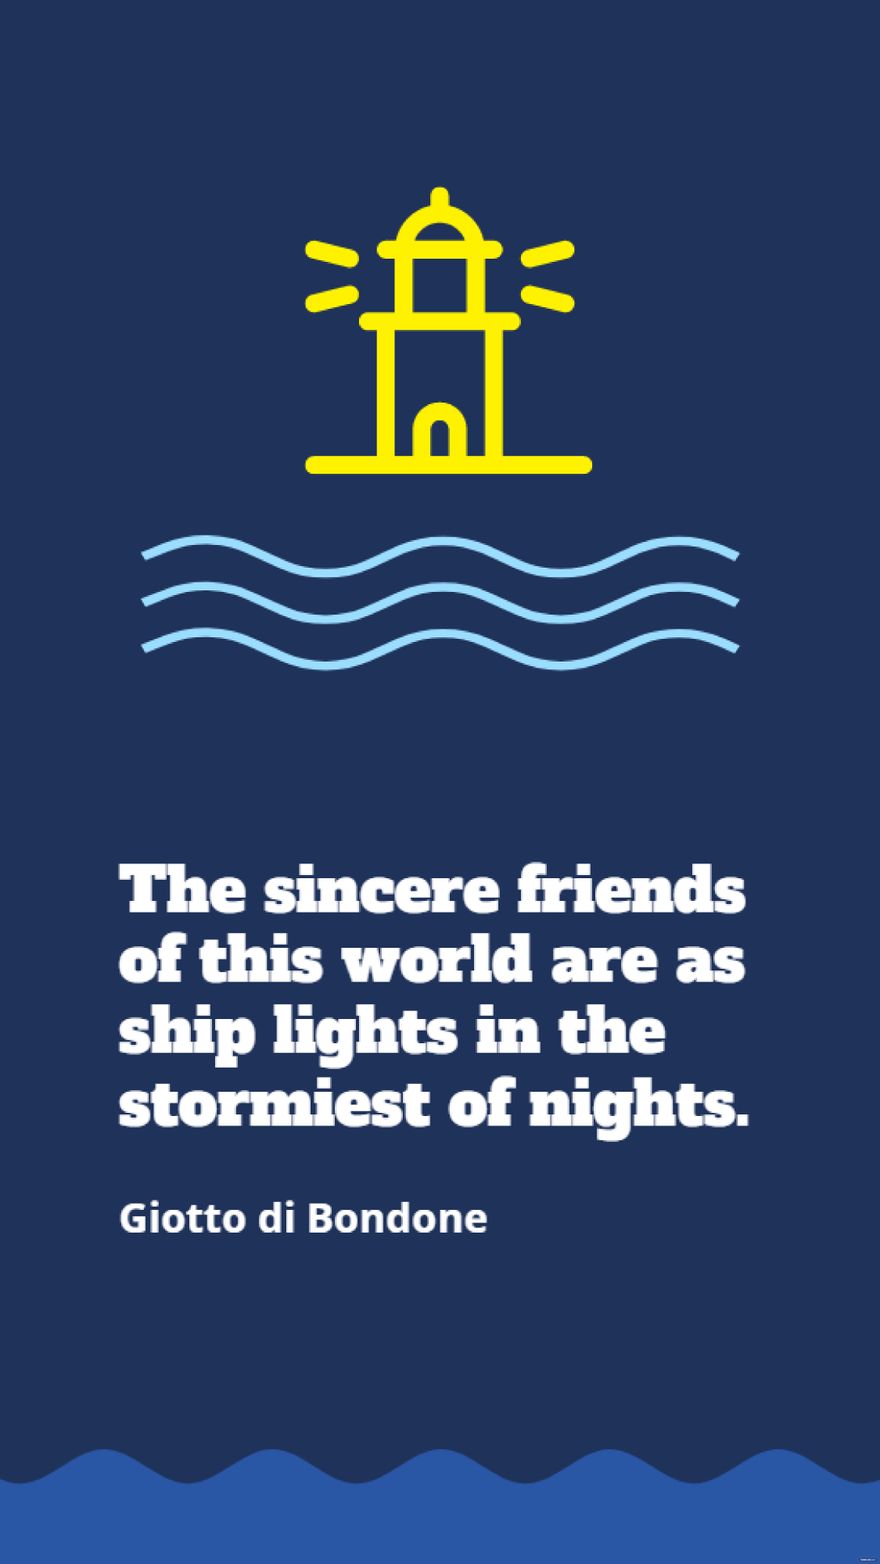 Giotto di Bondone - The sincere friends of this world are as ship lights in the stormiest of nights. in JPG